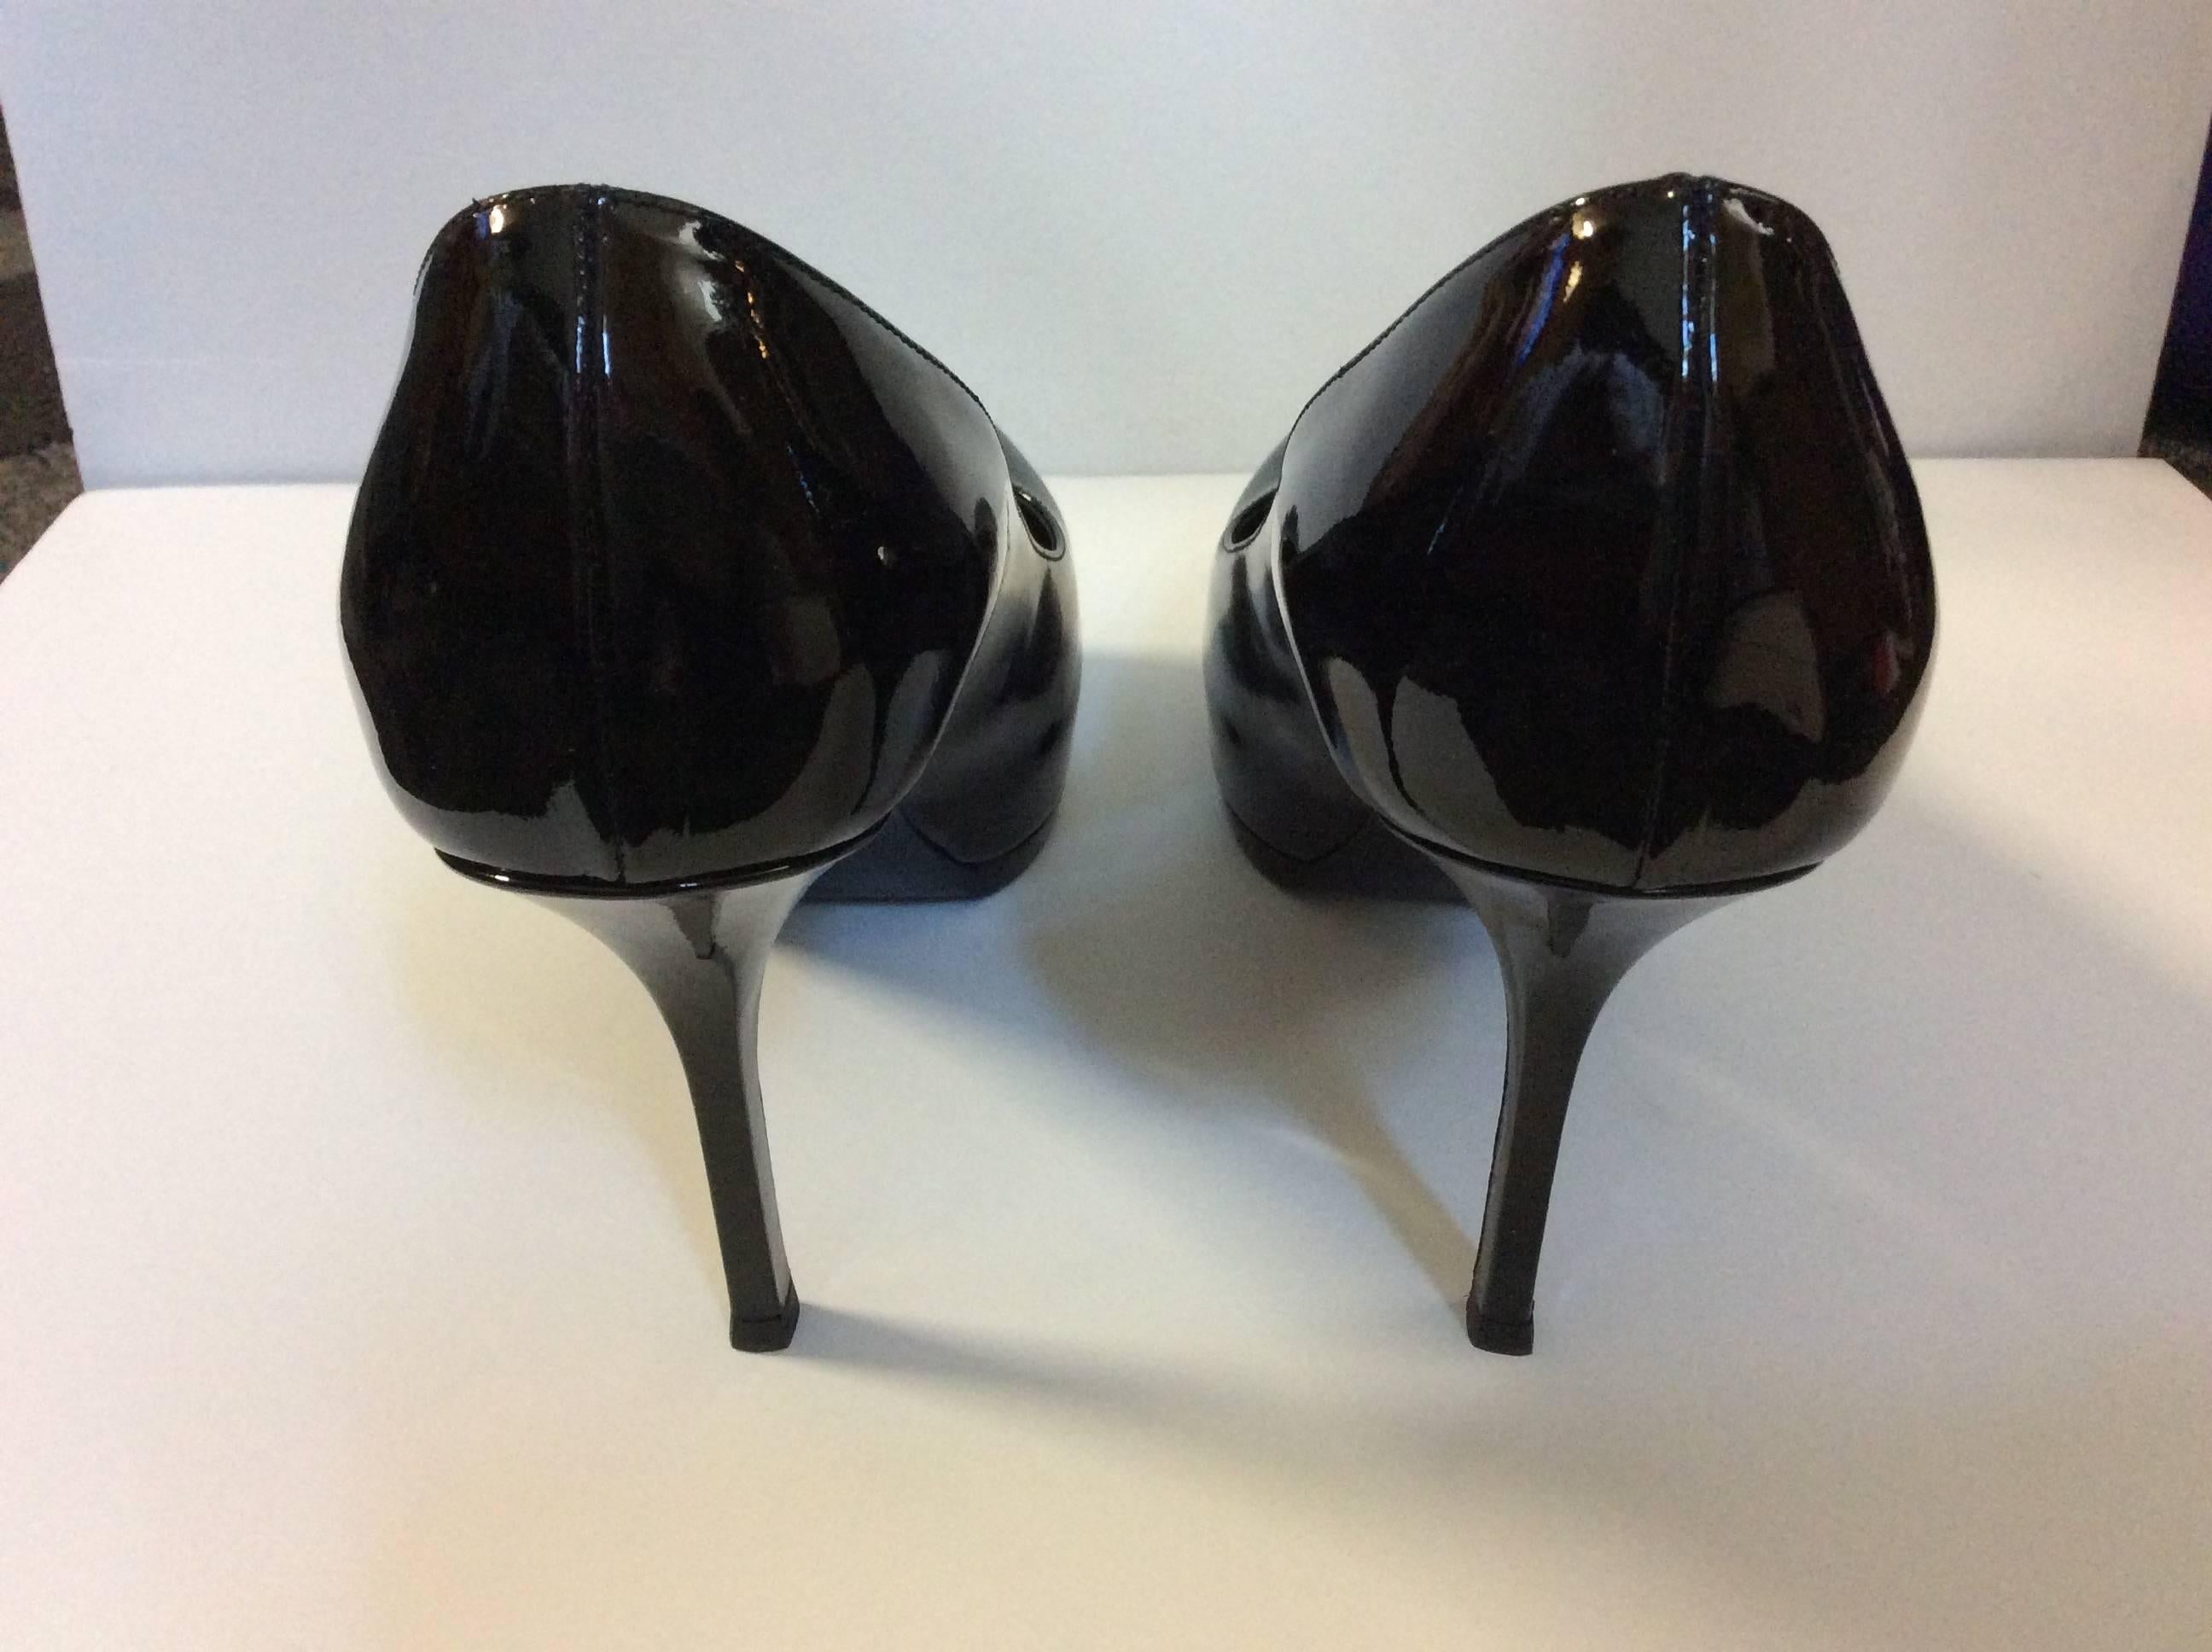 Yves Saint Laurent YSL Tribute Black Patent Leather New 37.5 In Excellent Condition For Sale In Boca Raton, FL